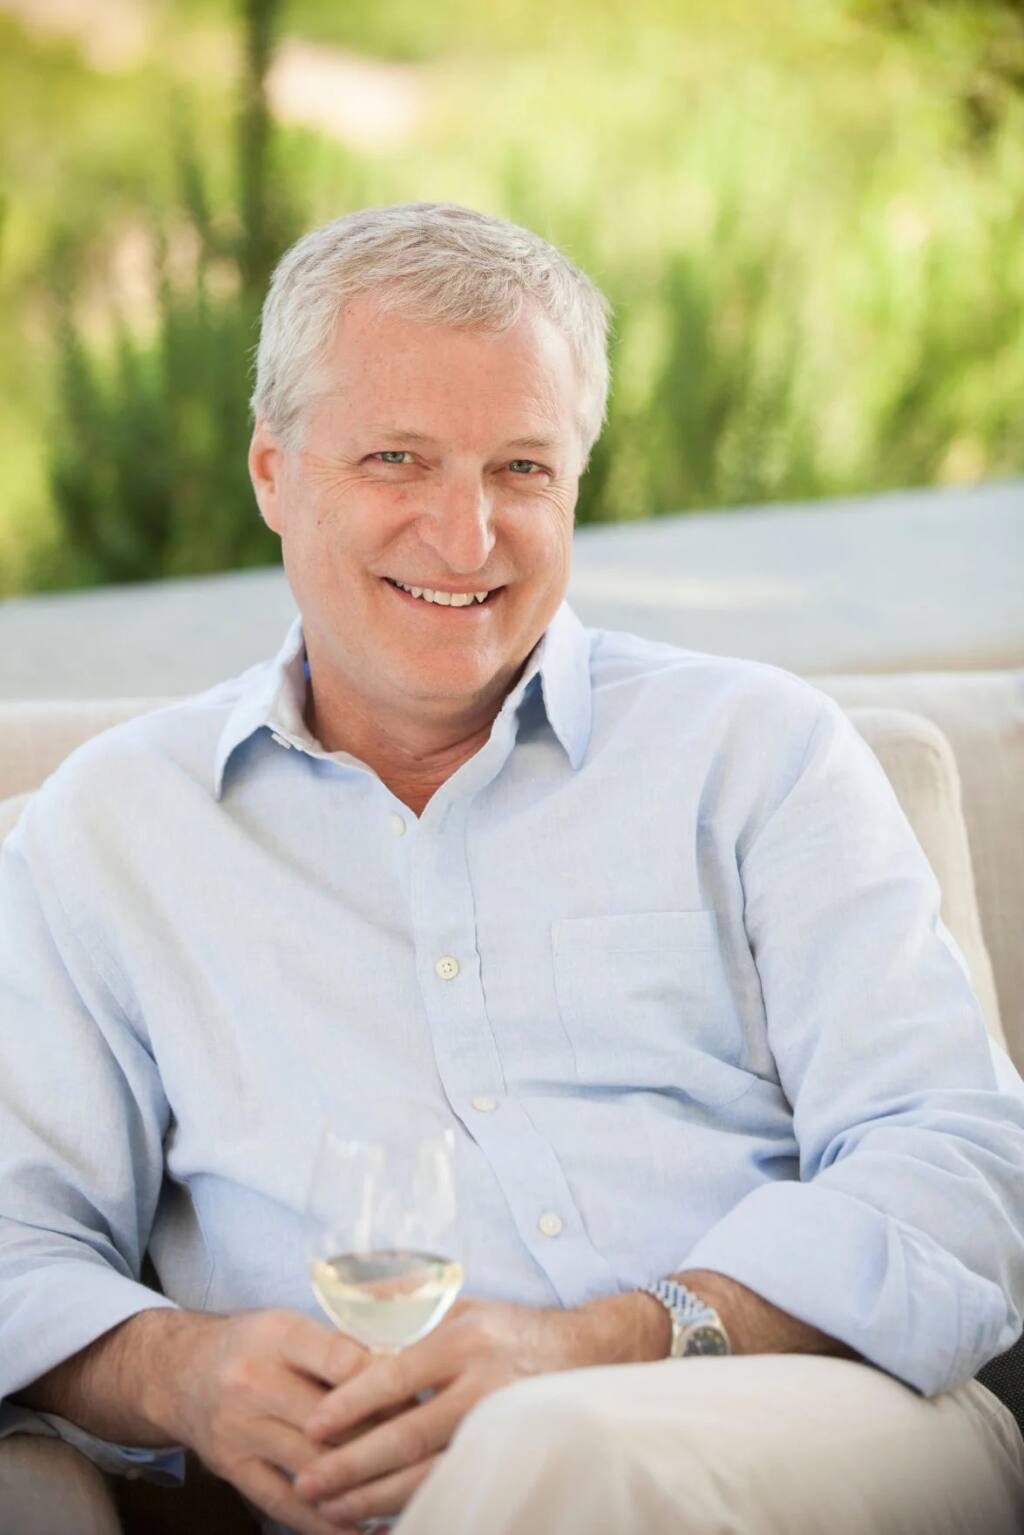 Russell Weis, who led Silverado Vineyards for 18 years up to its recent sale to Foley Family Wines, is hired as president and chief operating officer for Napa-based Walsh Vineyards Management Inc. (courtesy of Silverado Vineyards)